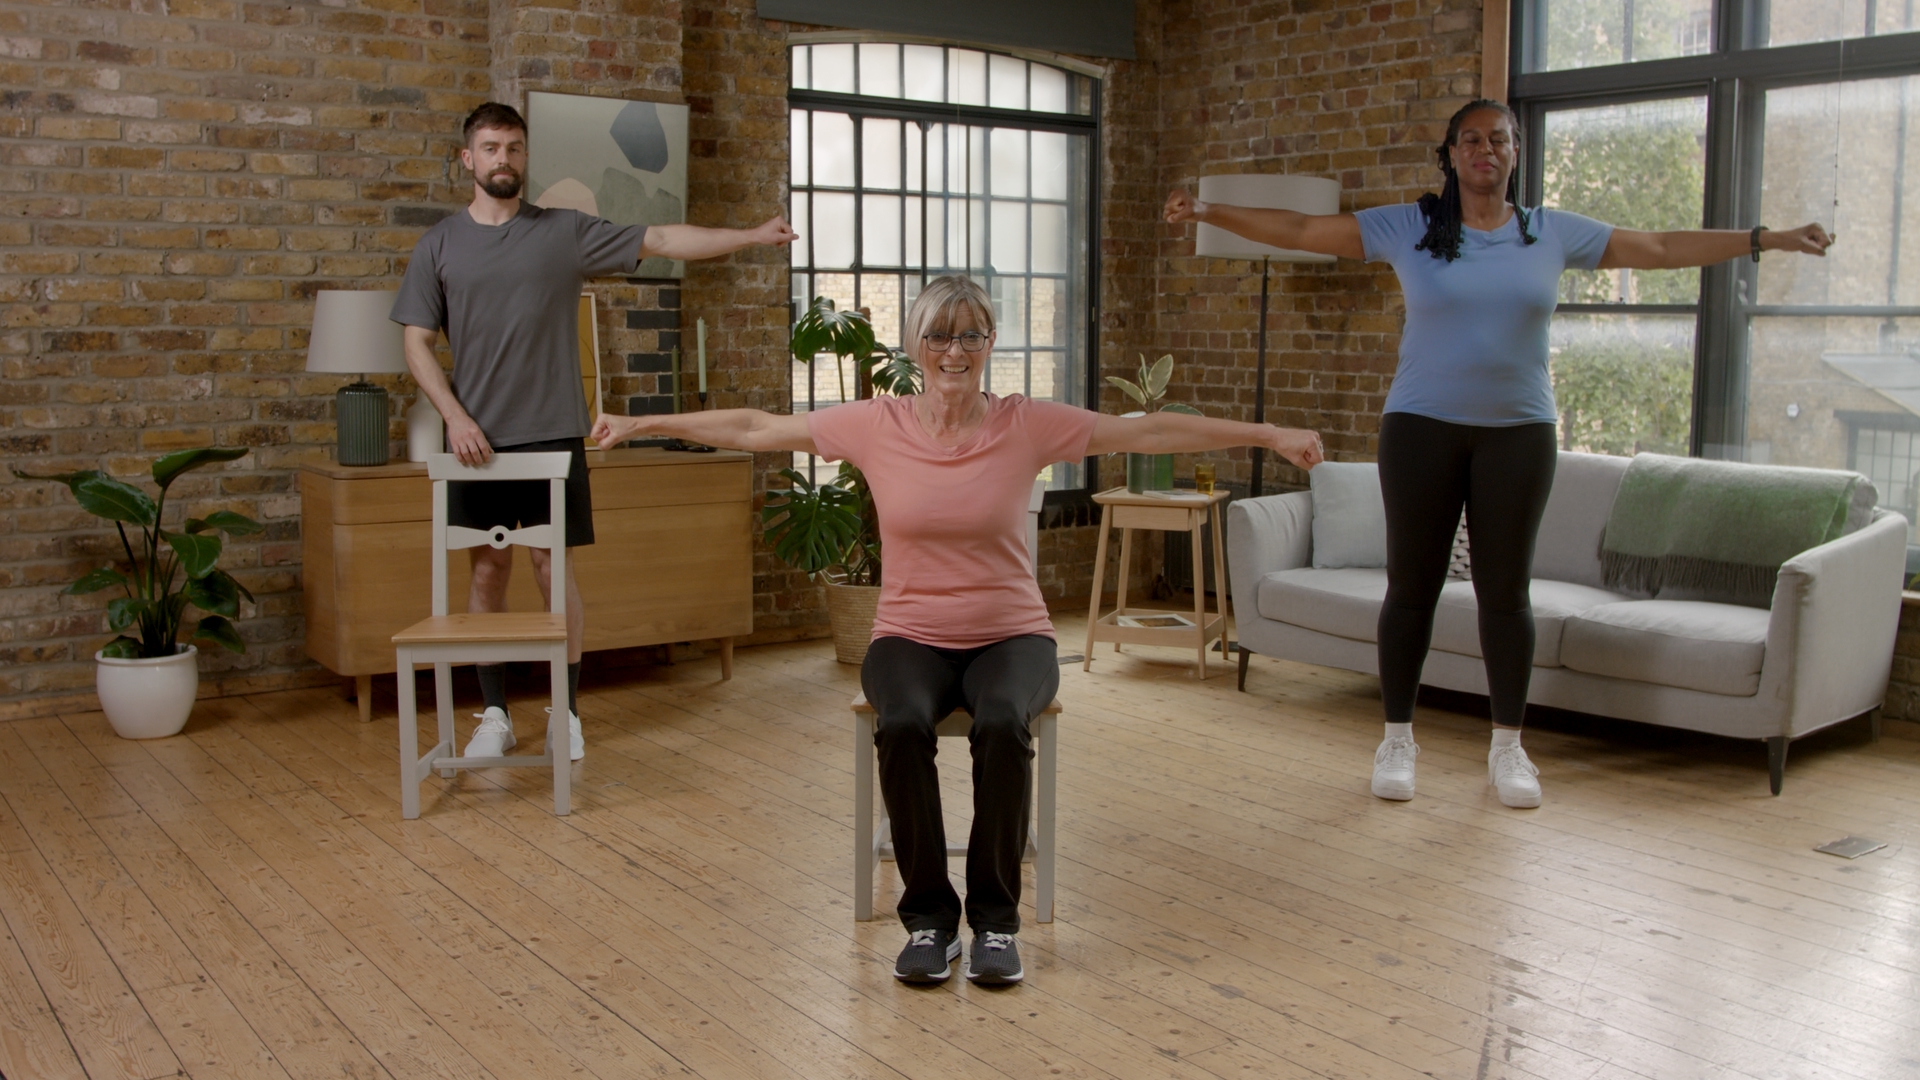 ‘We Are Undefeatable’ charities produce videos to support people with health conditions to move more